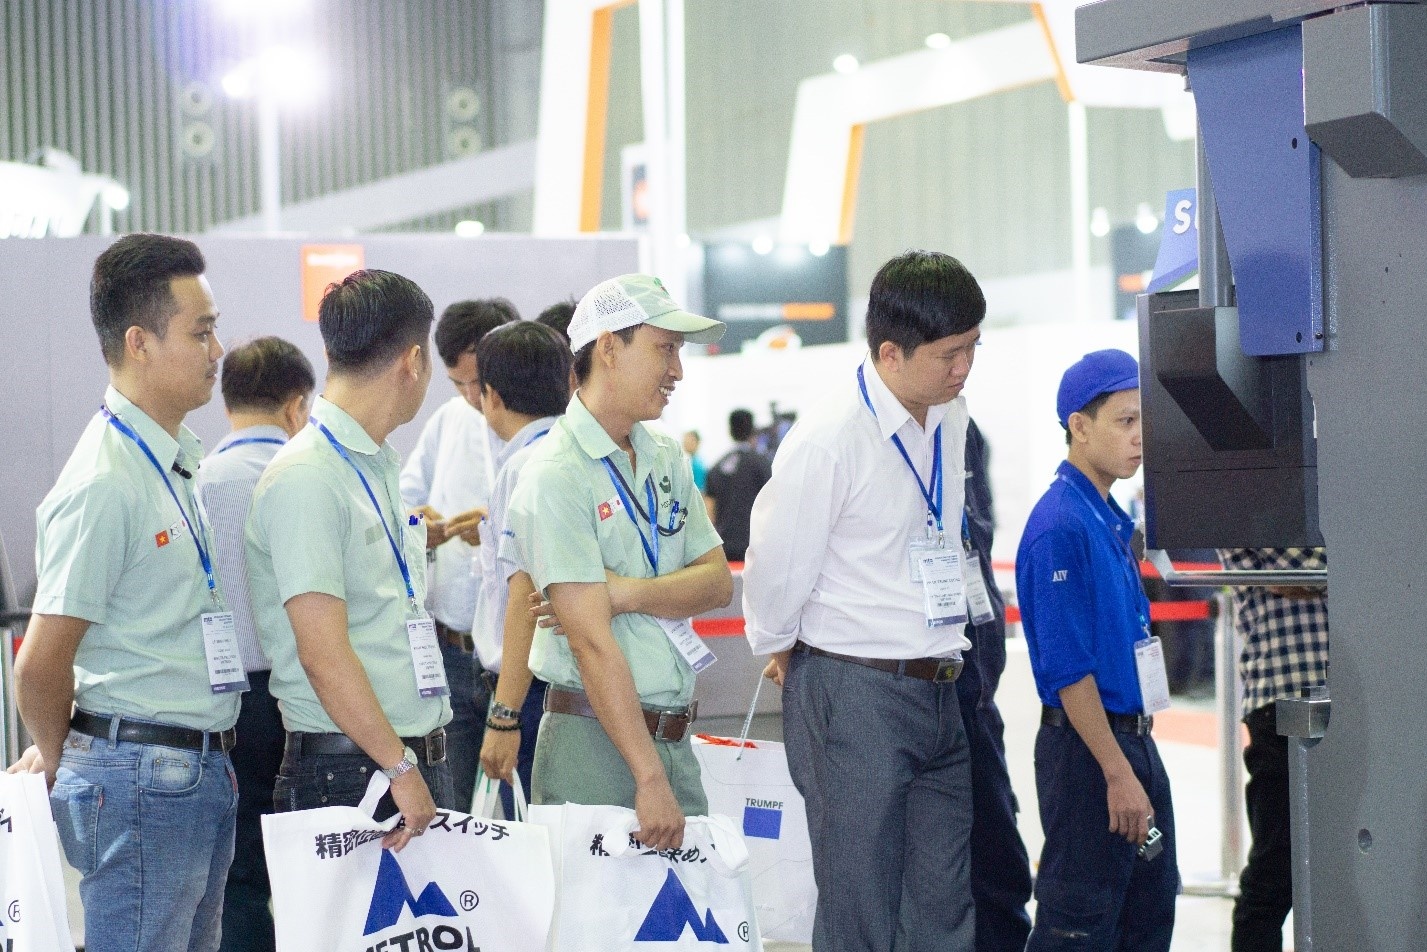 MTA Vietnam: An exhibition of interest to the engineering and manufacturing community